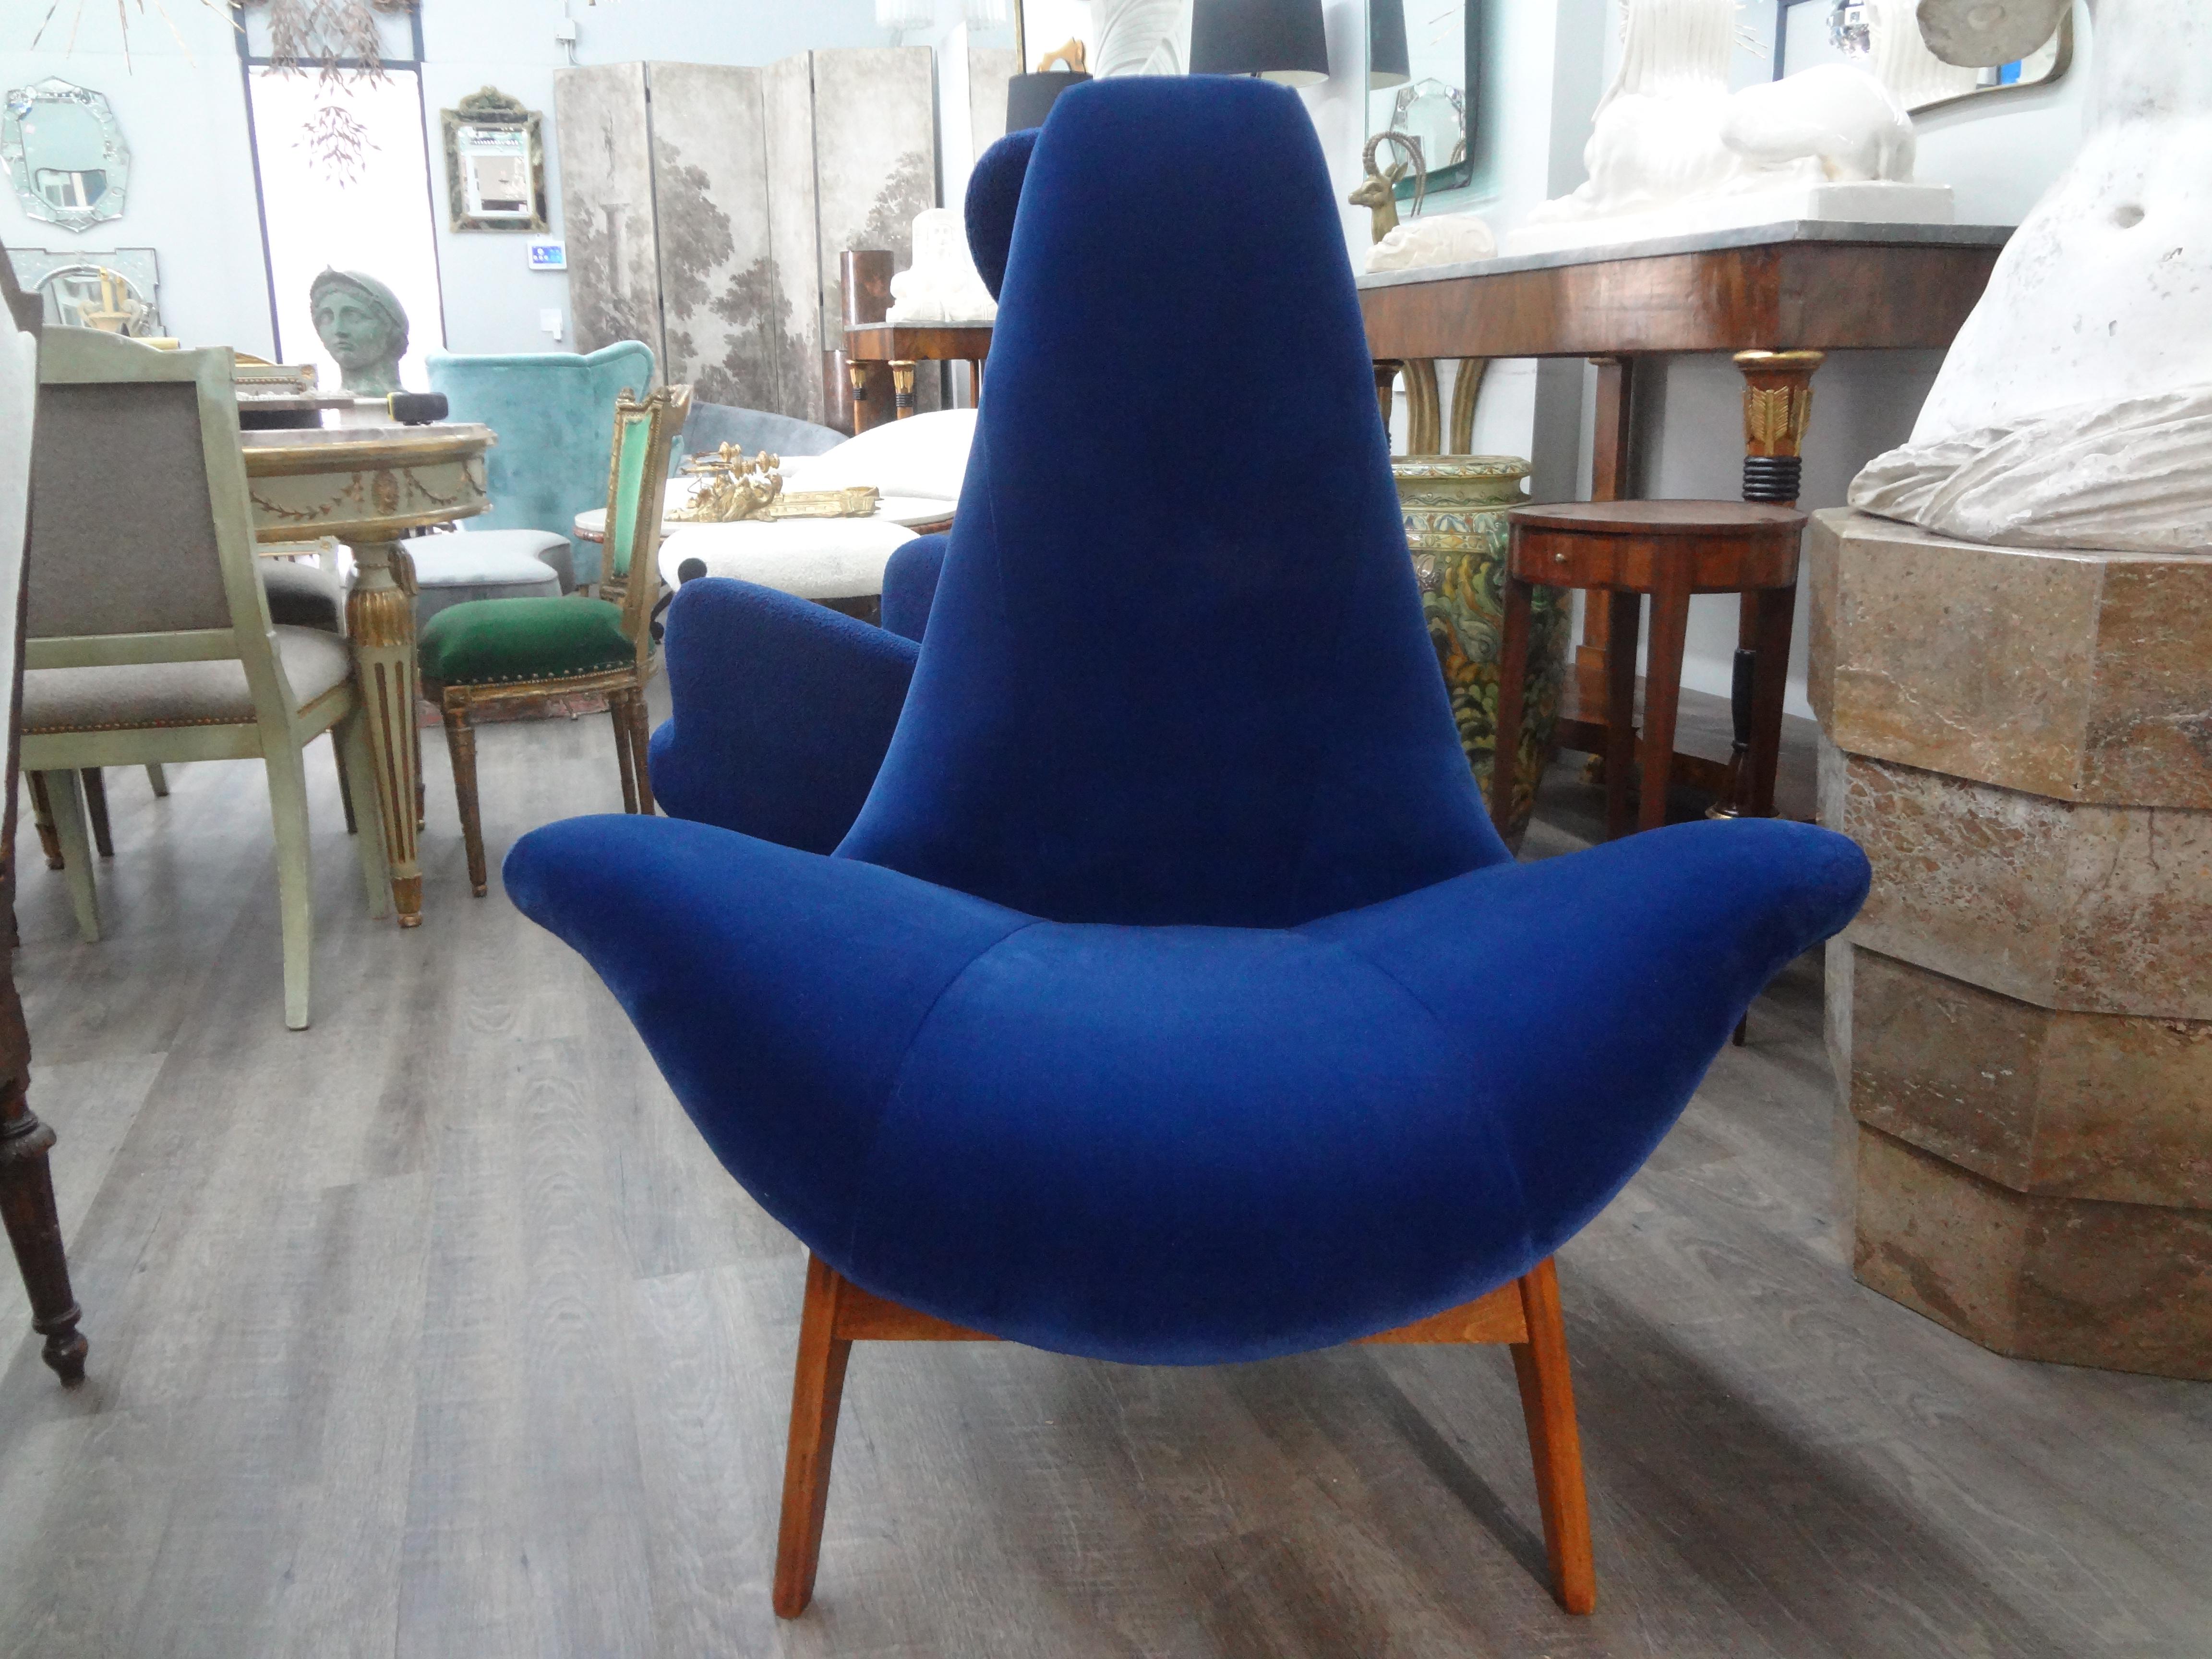 Pair Of Adrian Pearsall Gondola Lounge Chairs. This iconic pair of sculptural gondola lounge chairs, scoop chairs or wing chairs have a floating design and have been professionally upholstered in plush navy blue mohair fabric.
These large lounge